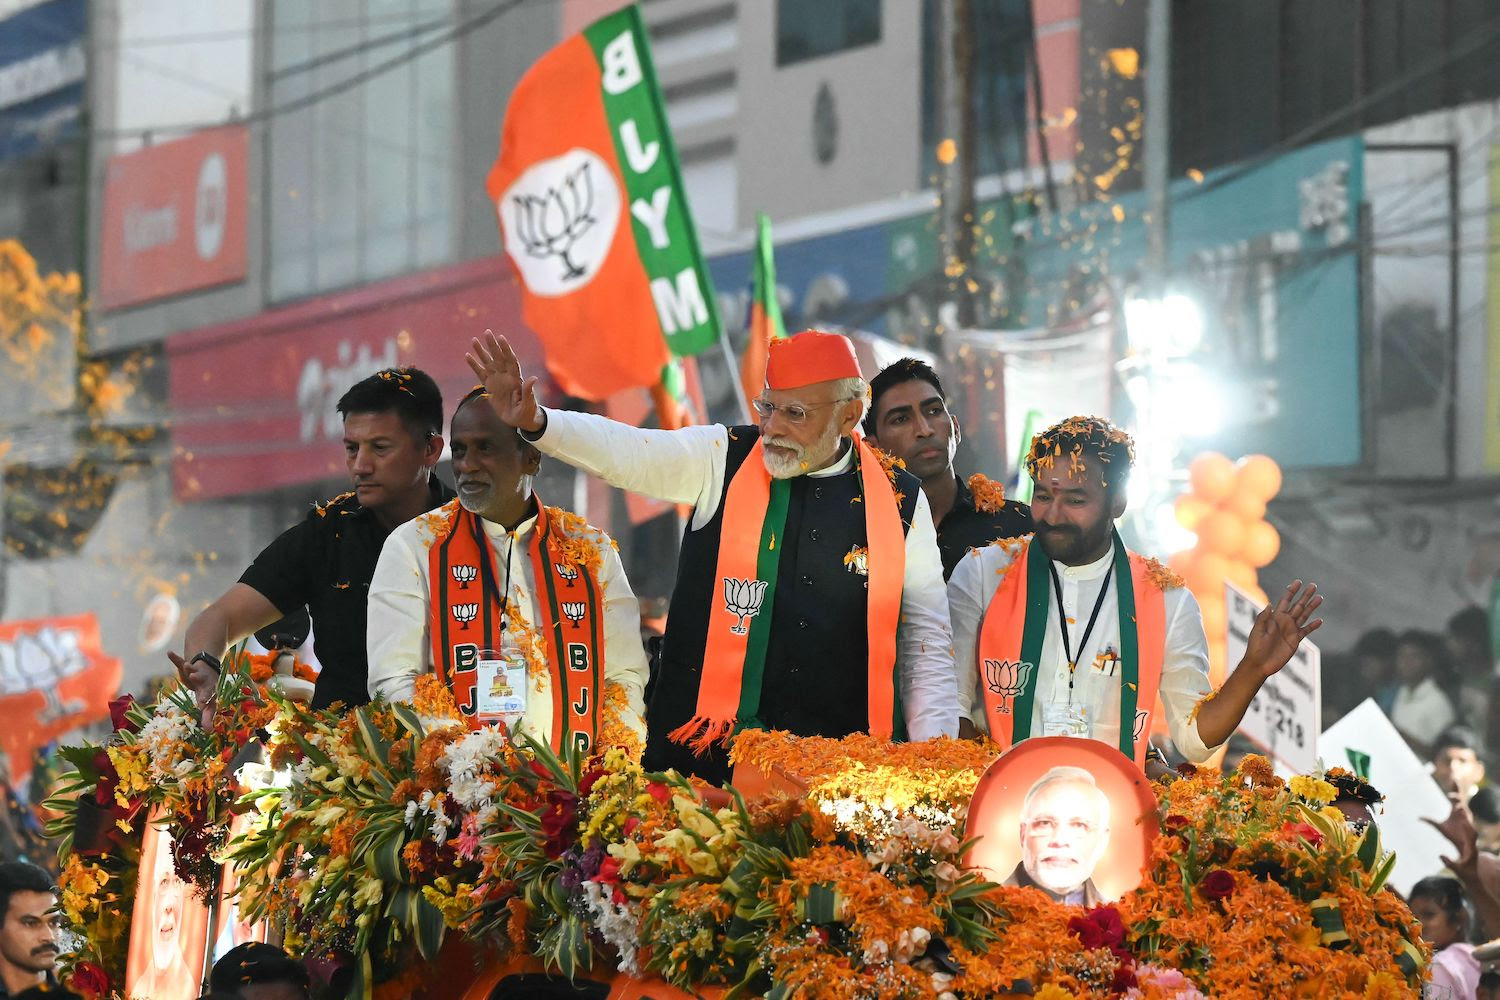 Indian Prime Minister Narendra Modi waves to the crowd as he stands in a float during a campaign event. Modi wears a black vest with a scarf and hat in the orange-and-green colors of the Indian flag. The float is also decorated with orange flowers and photos of Modi, and he is flanked by security officers and other members of his party.